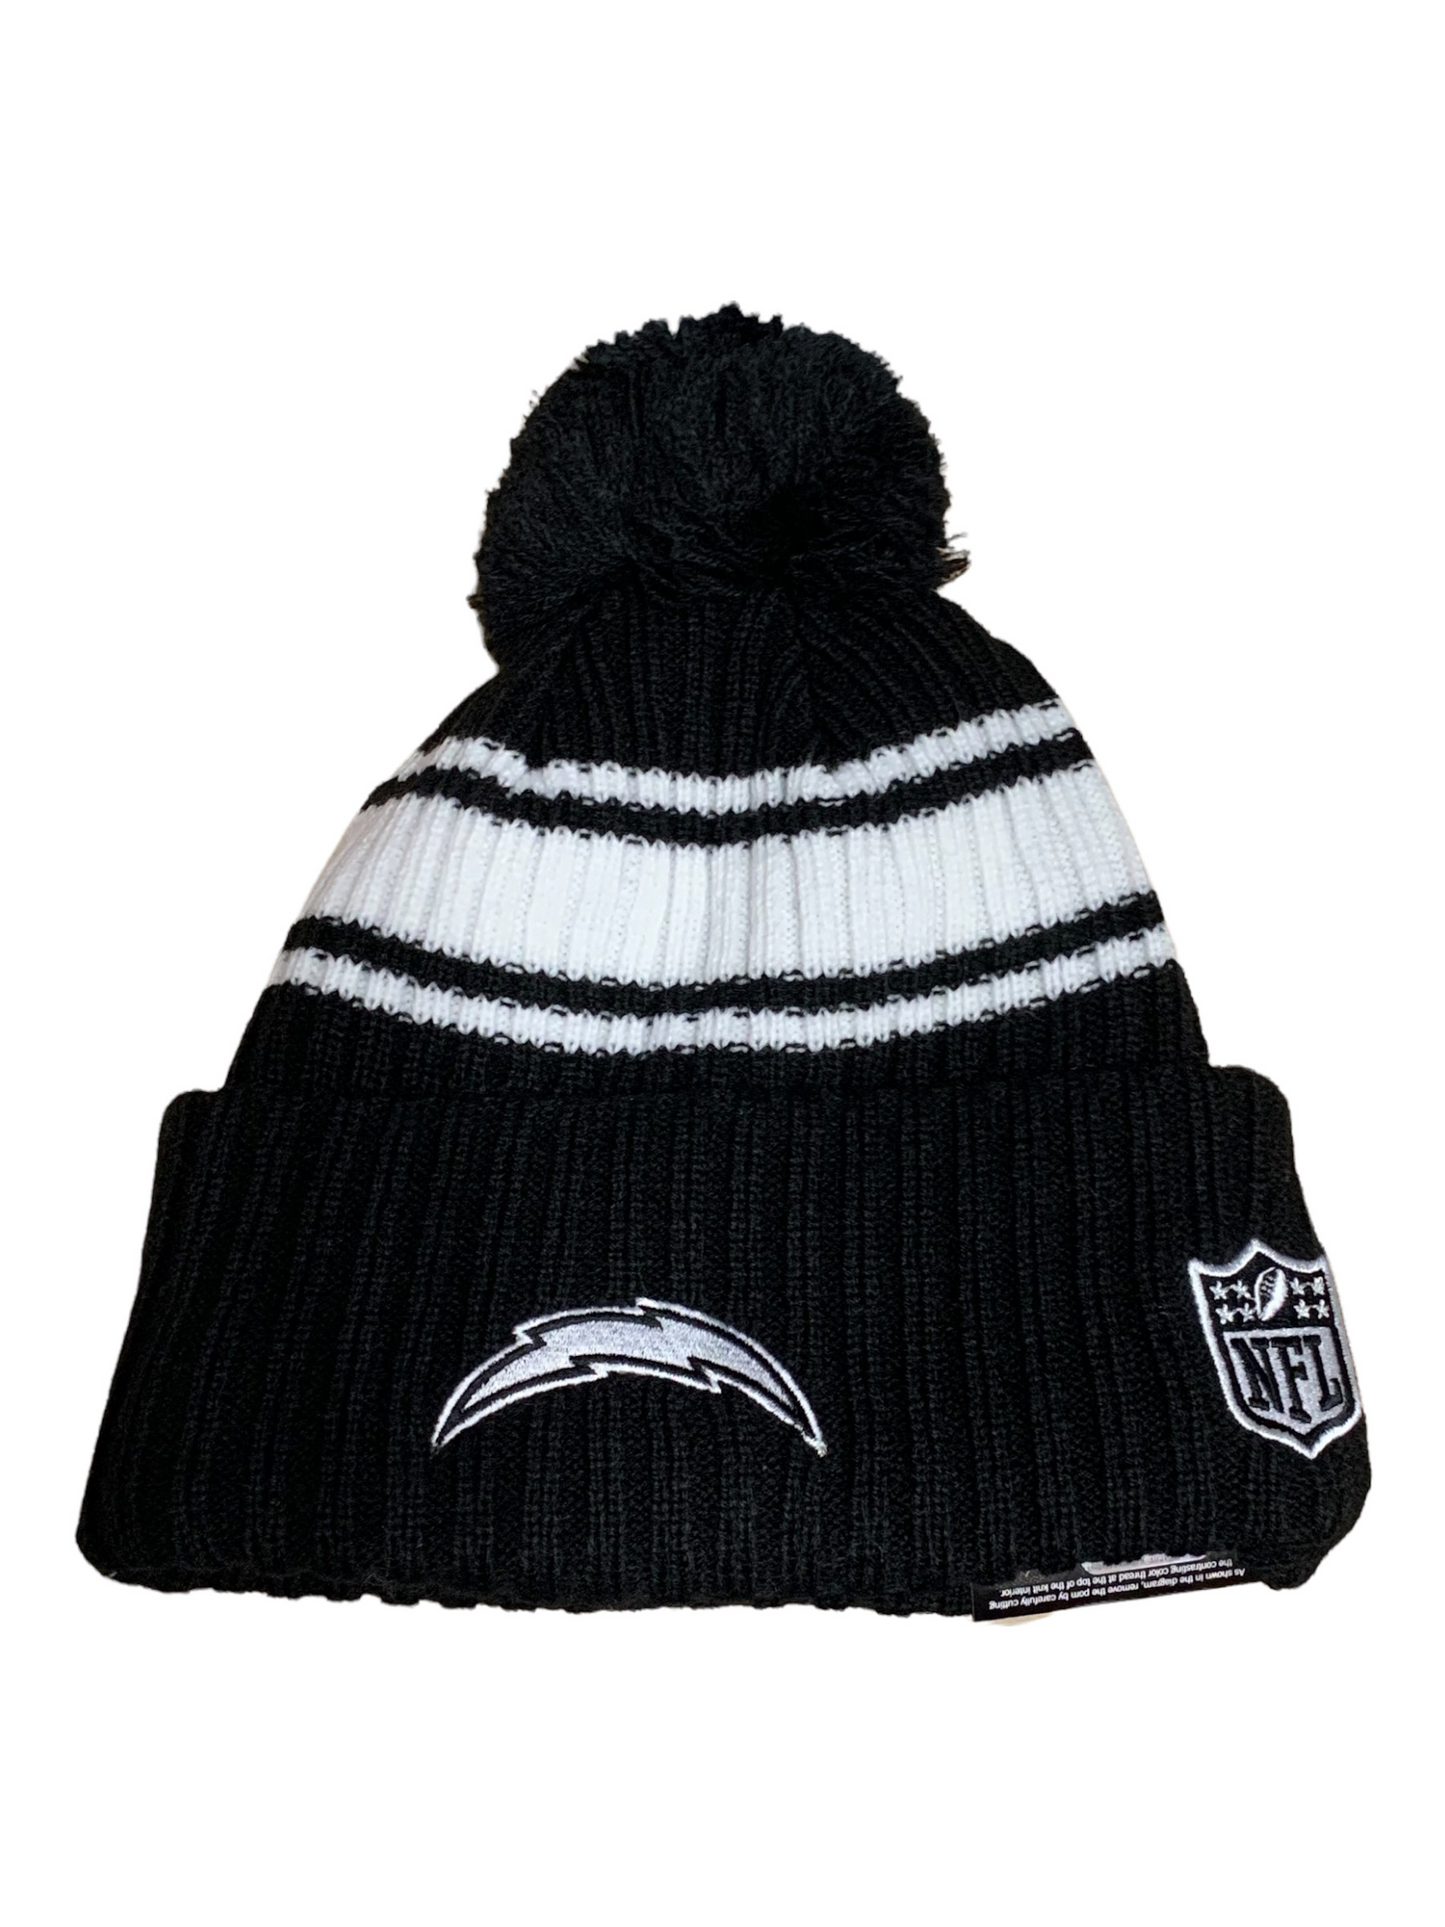 LOS ANGELES CHARGERS 2022 SIDELINE SPORT CUFFED POM KNIT -BLACK/WHITE